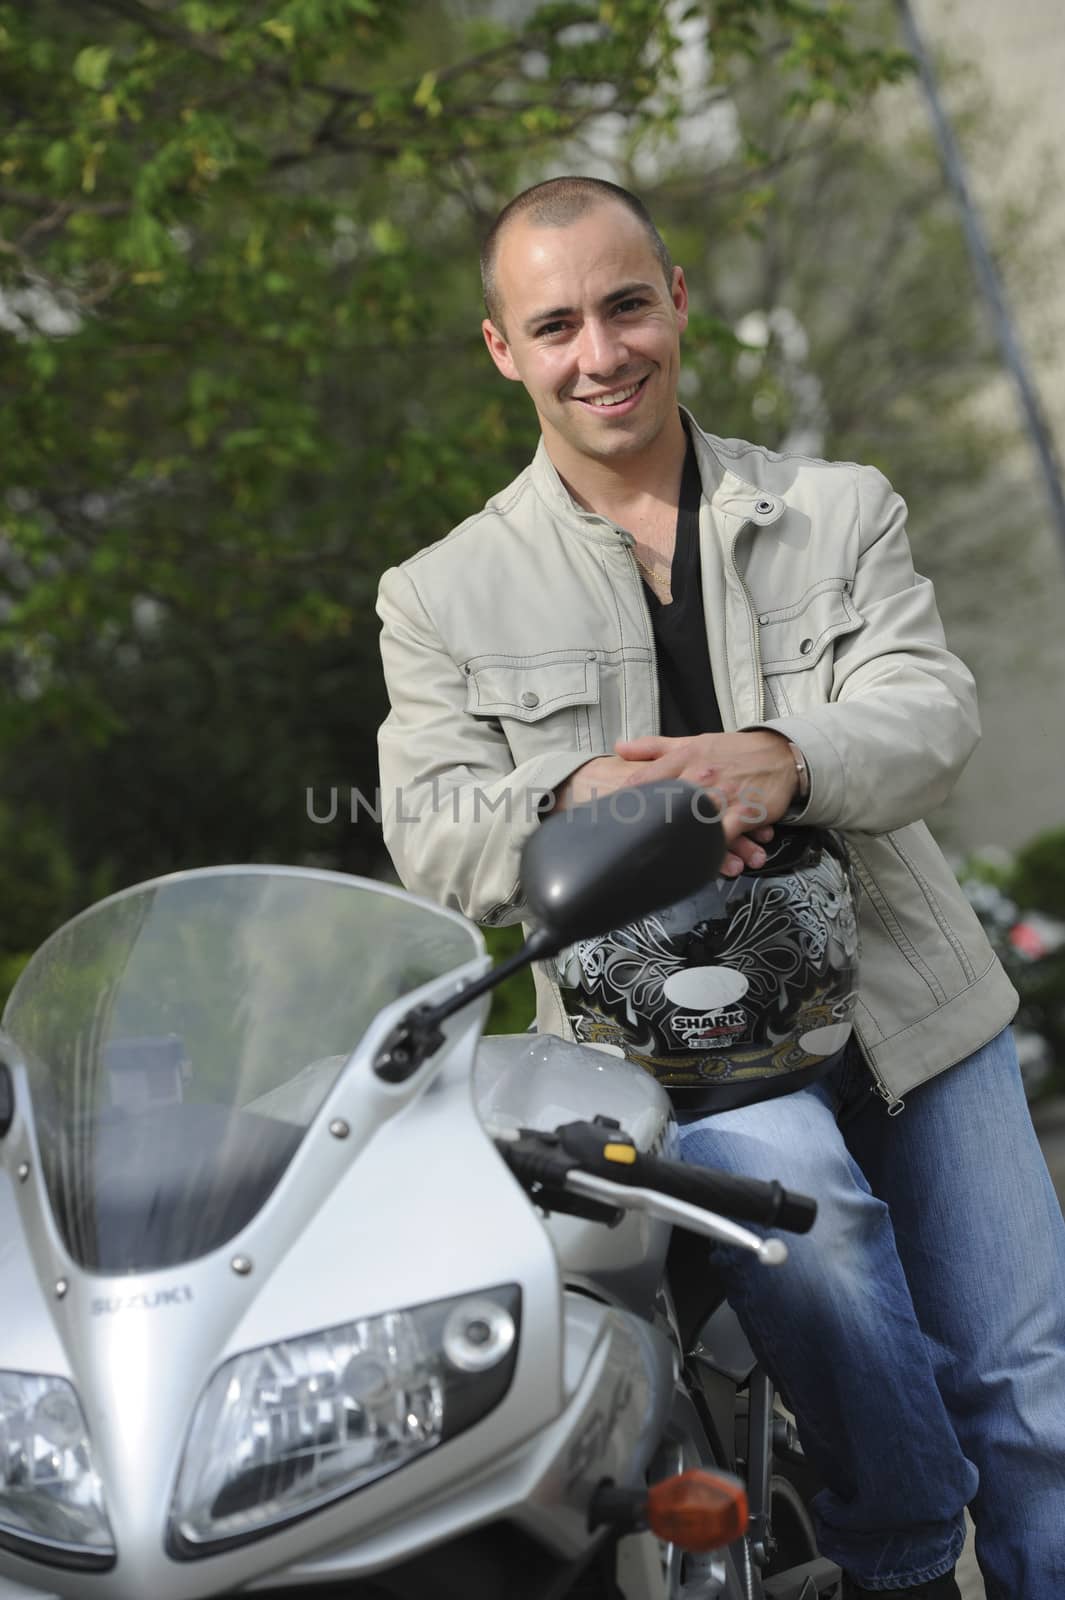 Young man with motorcycle